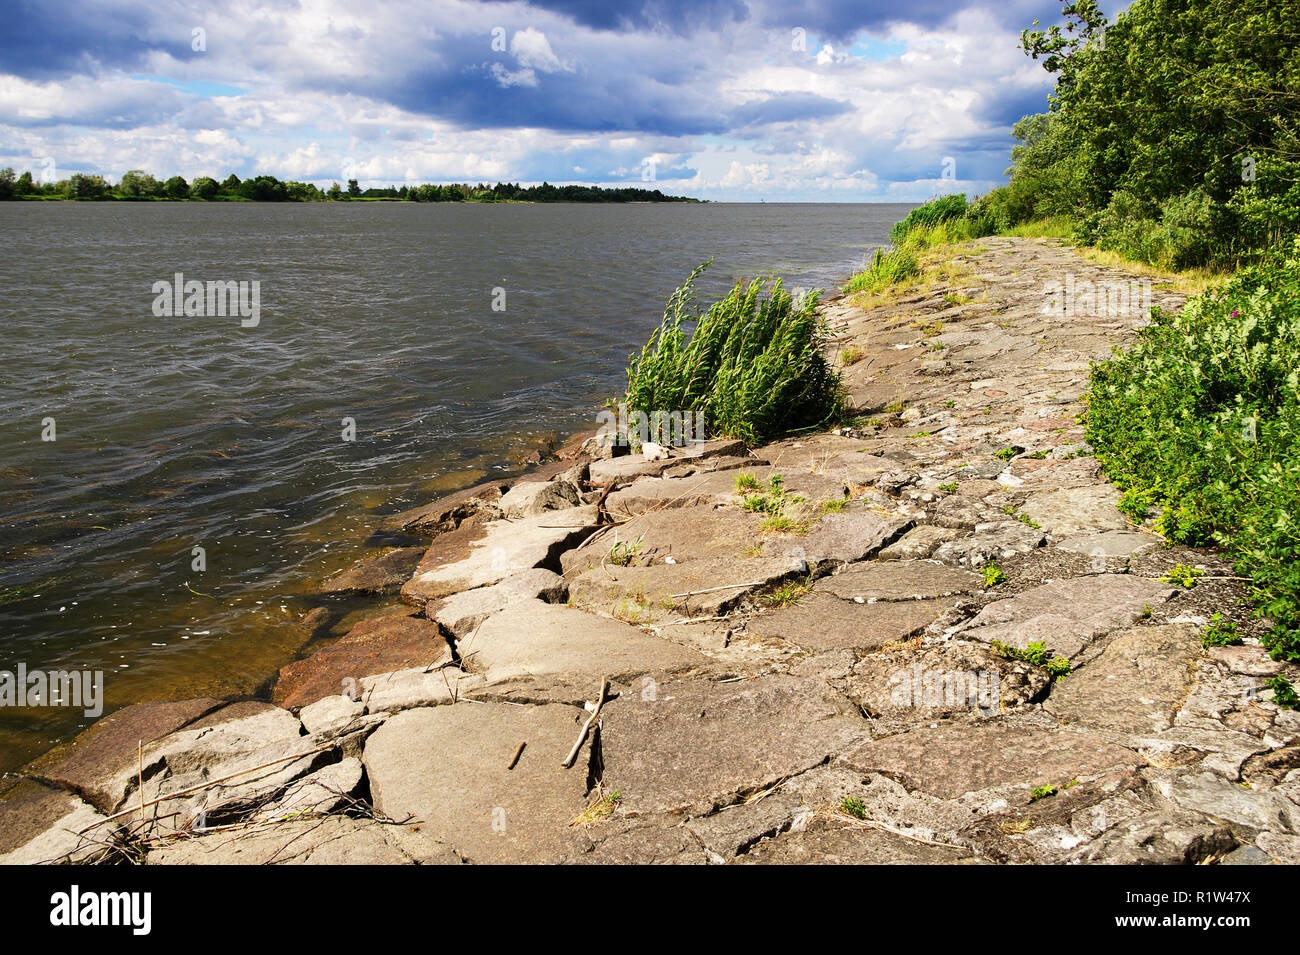 The mouth of the Vistula River to the Baltic Sea with a stone river embankment on a sunny day. Pomerania, Poland. Stock Photo